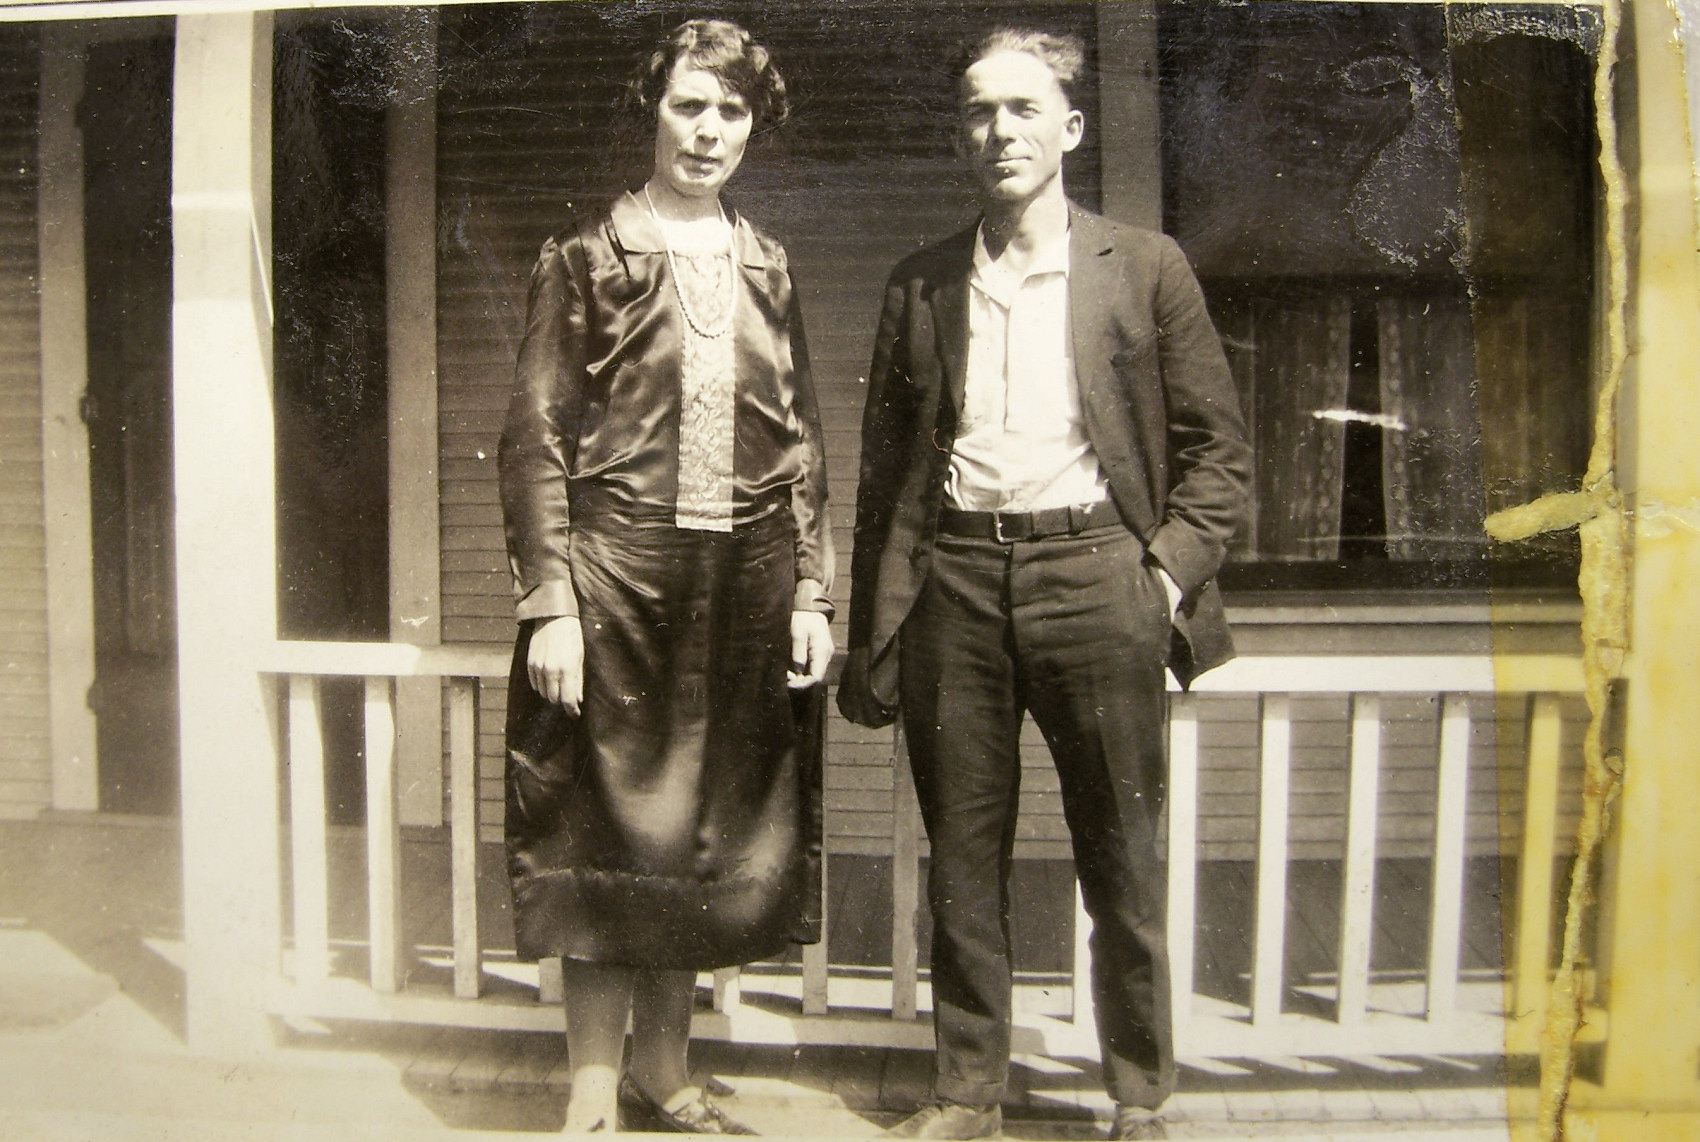 File:Vintage man and woman.jpg - Wikimedia Commons